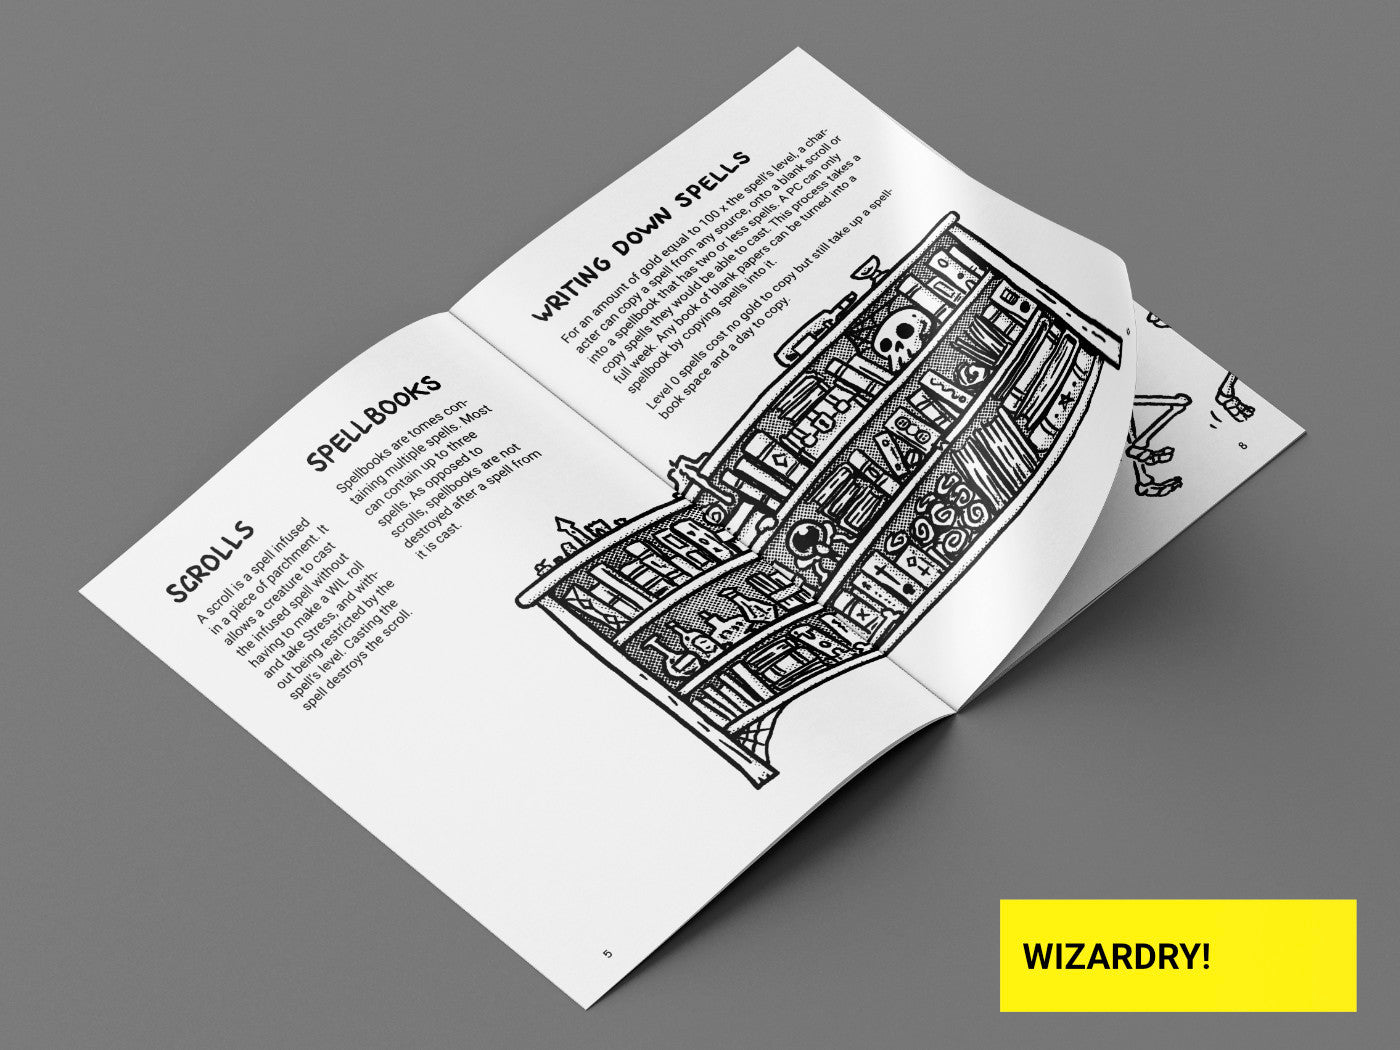 Wizardy! optional magic rules for DURF lightweight RPG by Emiel Boven